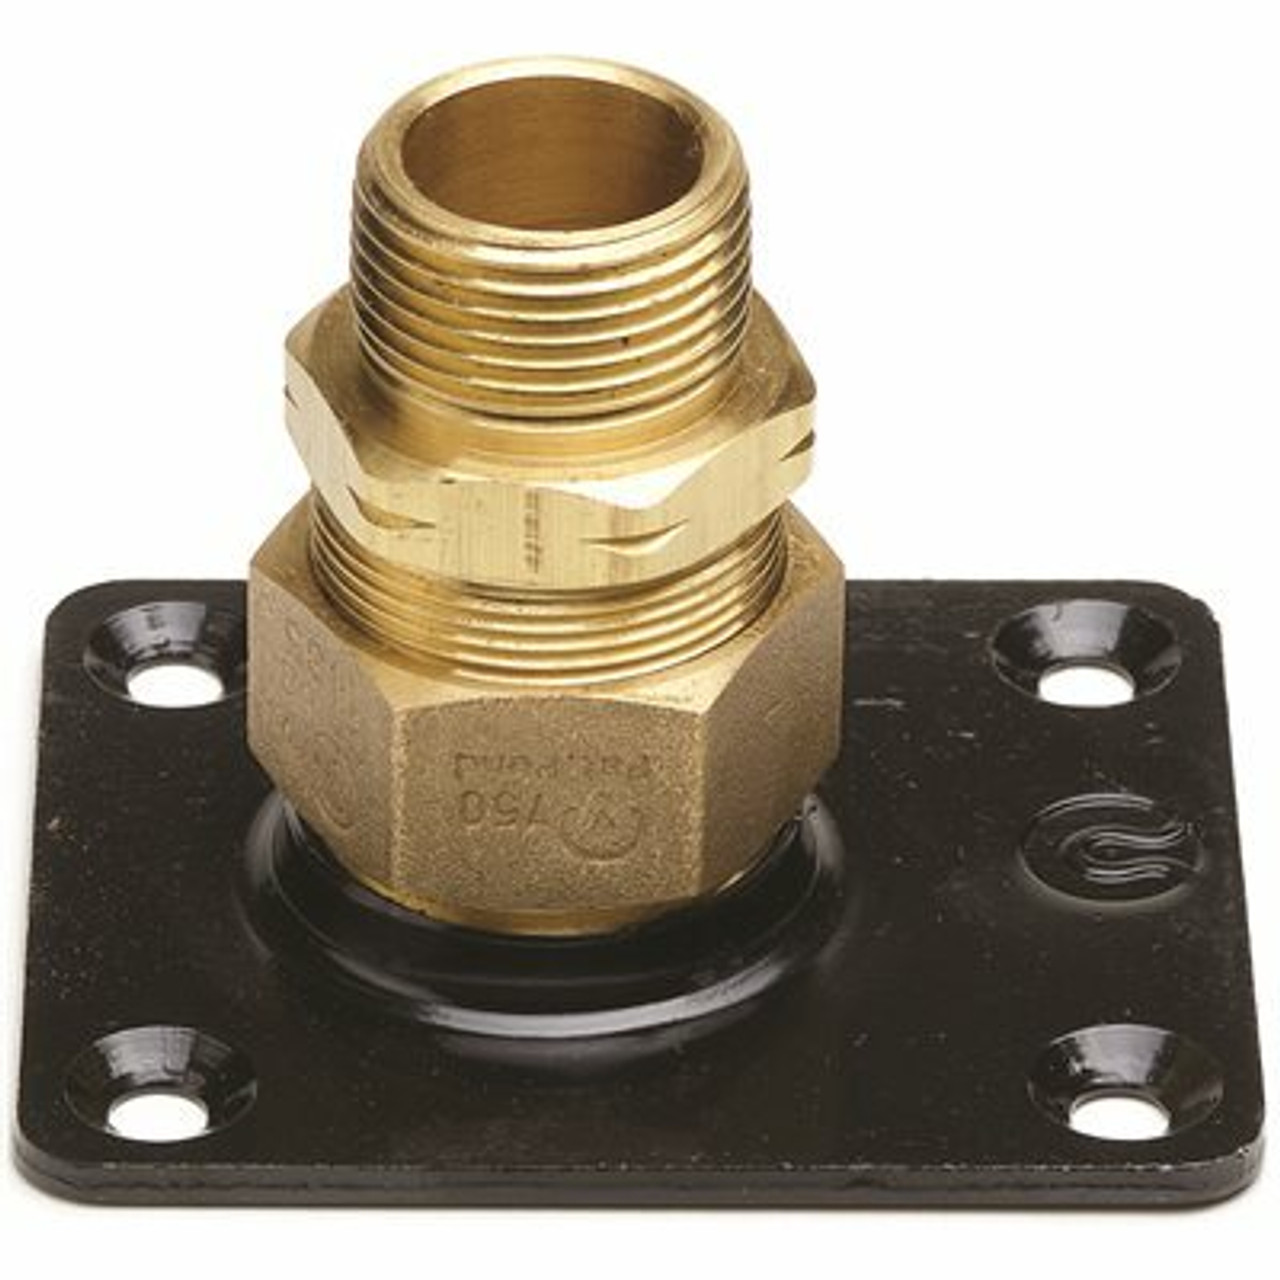 Omega Flex Tracpipe Counterstrike Autosnap Flange Fitting, 3/4 In.